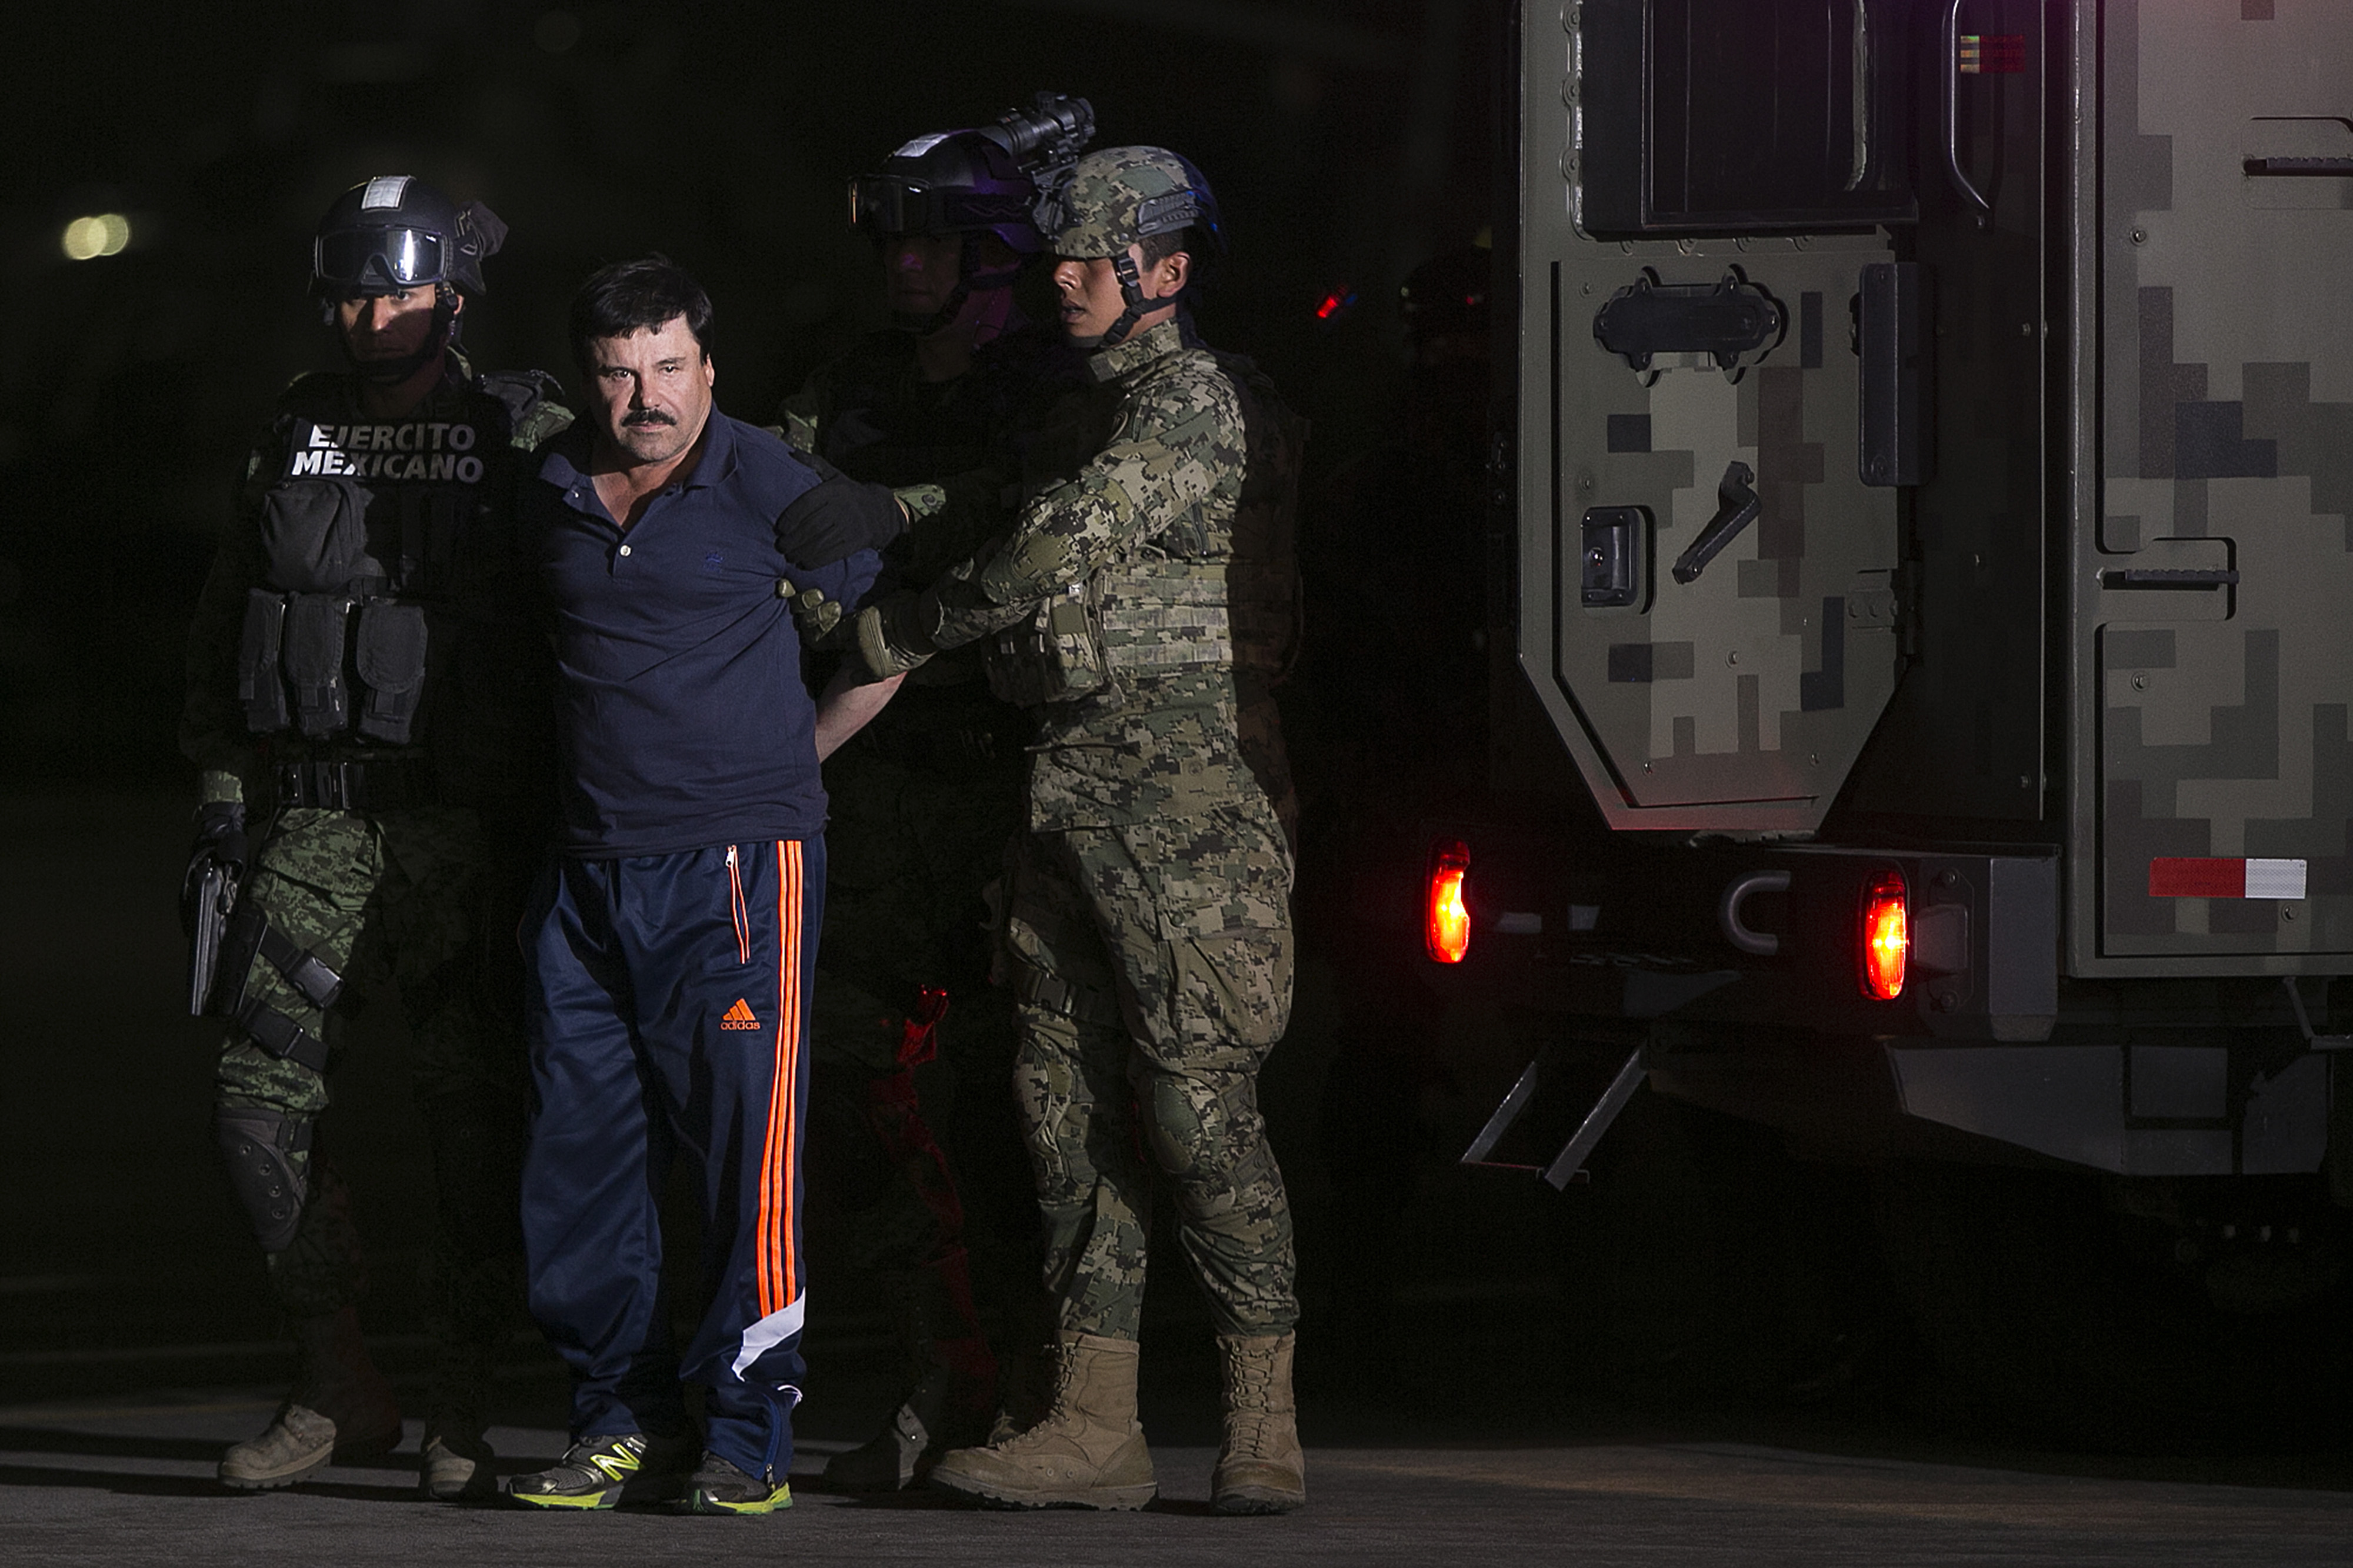 Joaquin Guzman, the world's most wanted-drug trafficker, second left, is escorted by Mexican security forces at a Navy hangar in Mexico City, Mexico, on Jan. 8, 2016.